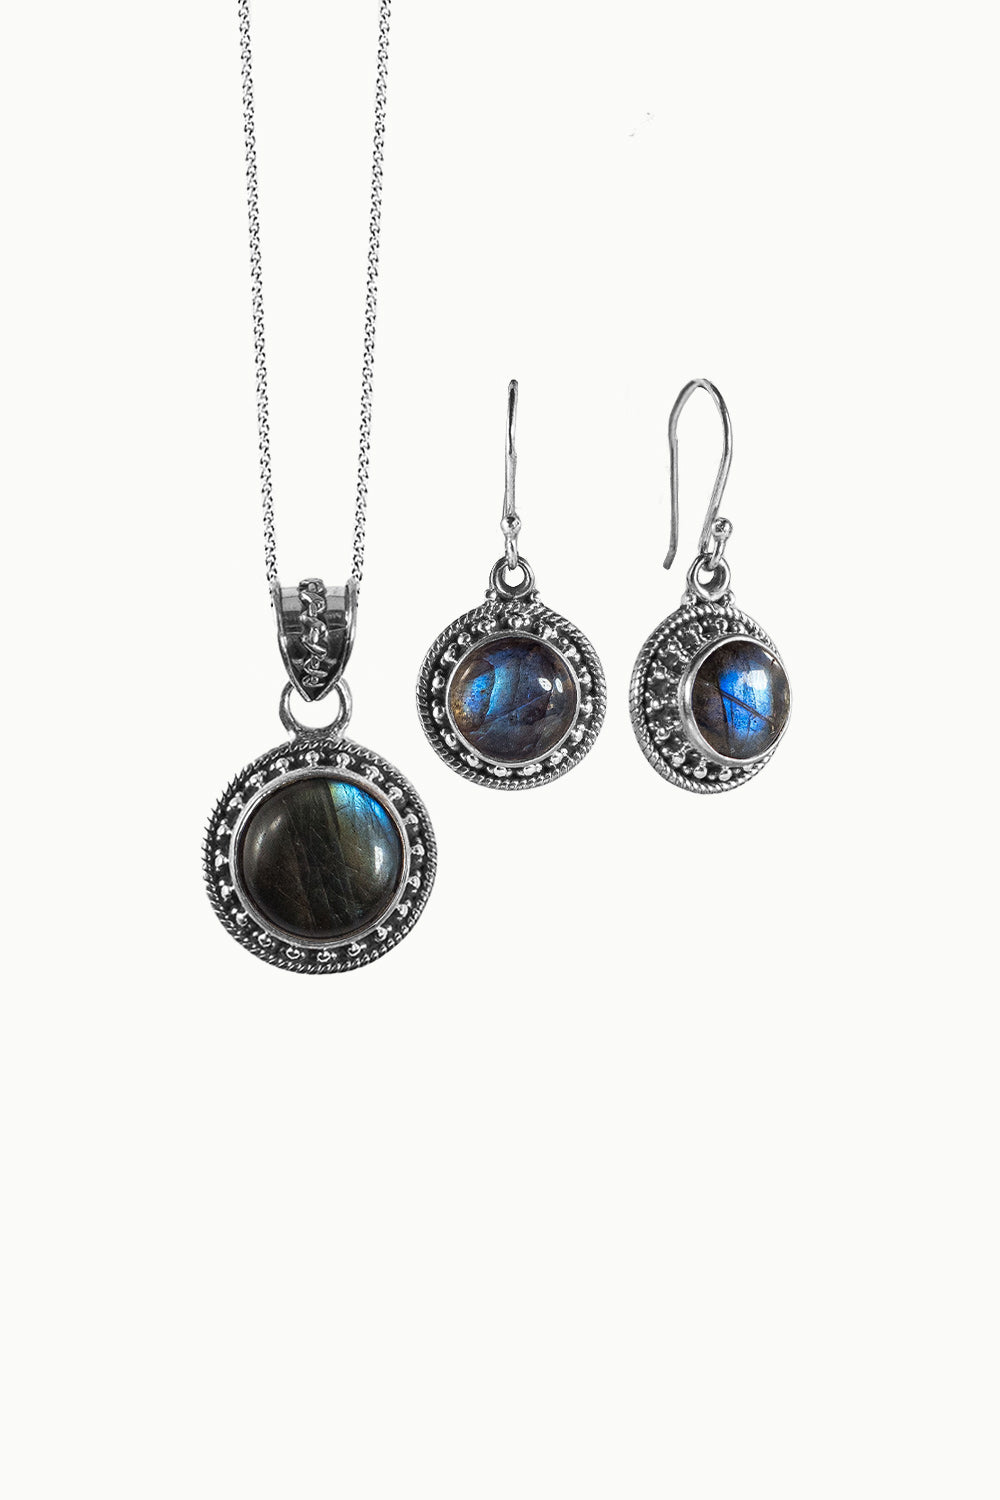 Sivalya Labradorite Silver Necklace and Earrings Jewelry Set - Aurora